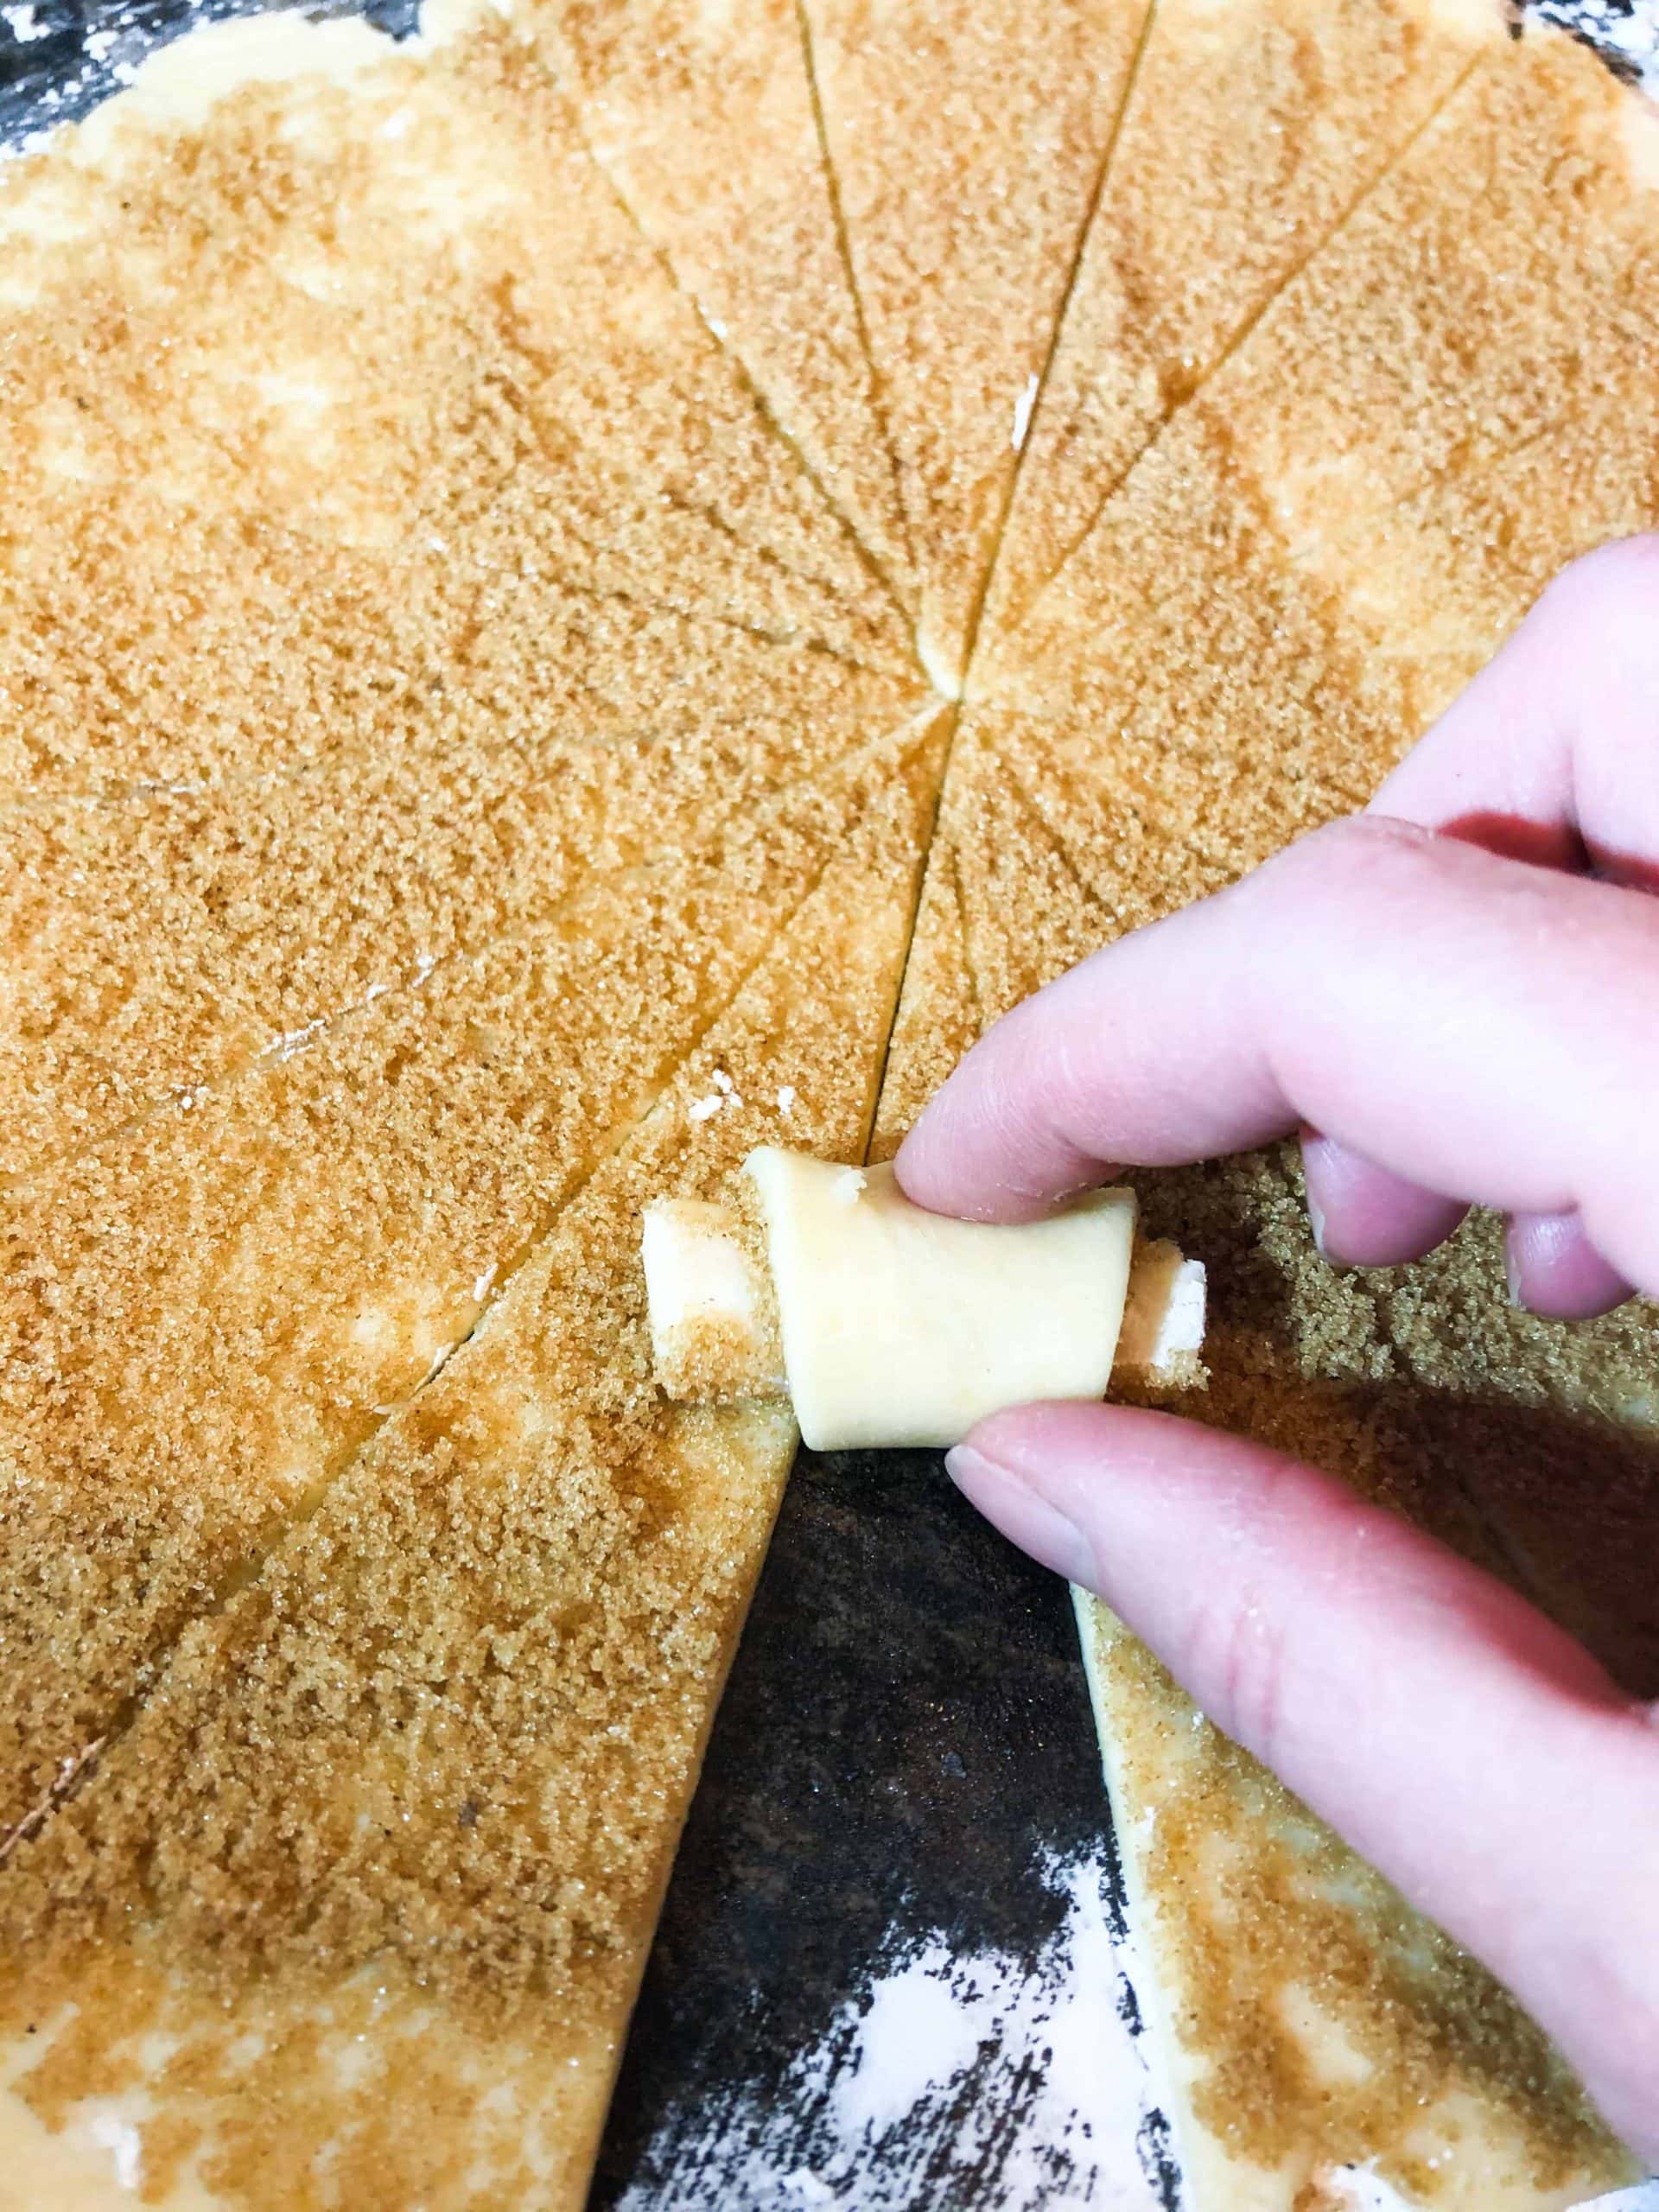 brown sugar cinnamon rugelach dough being shaped into crescents.  